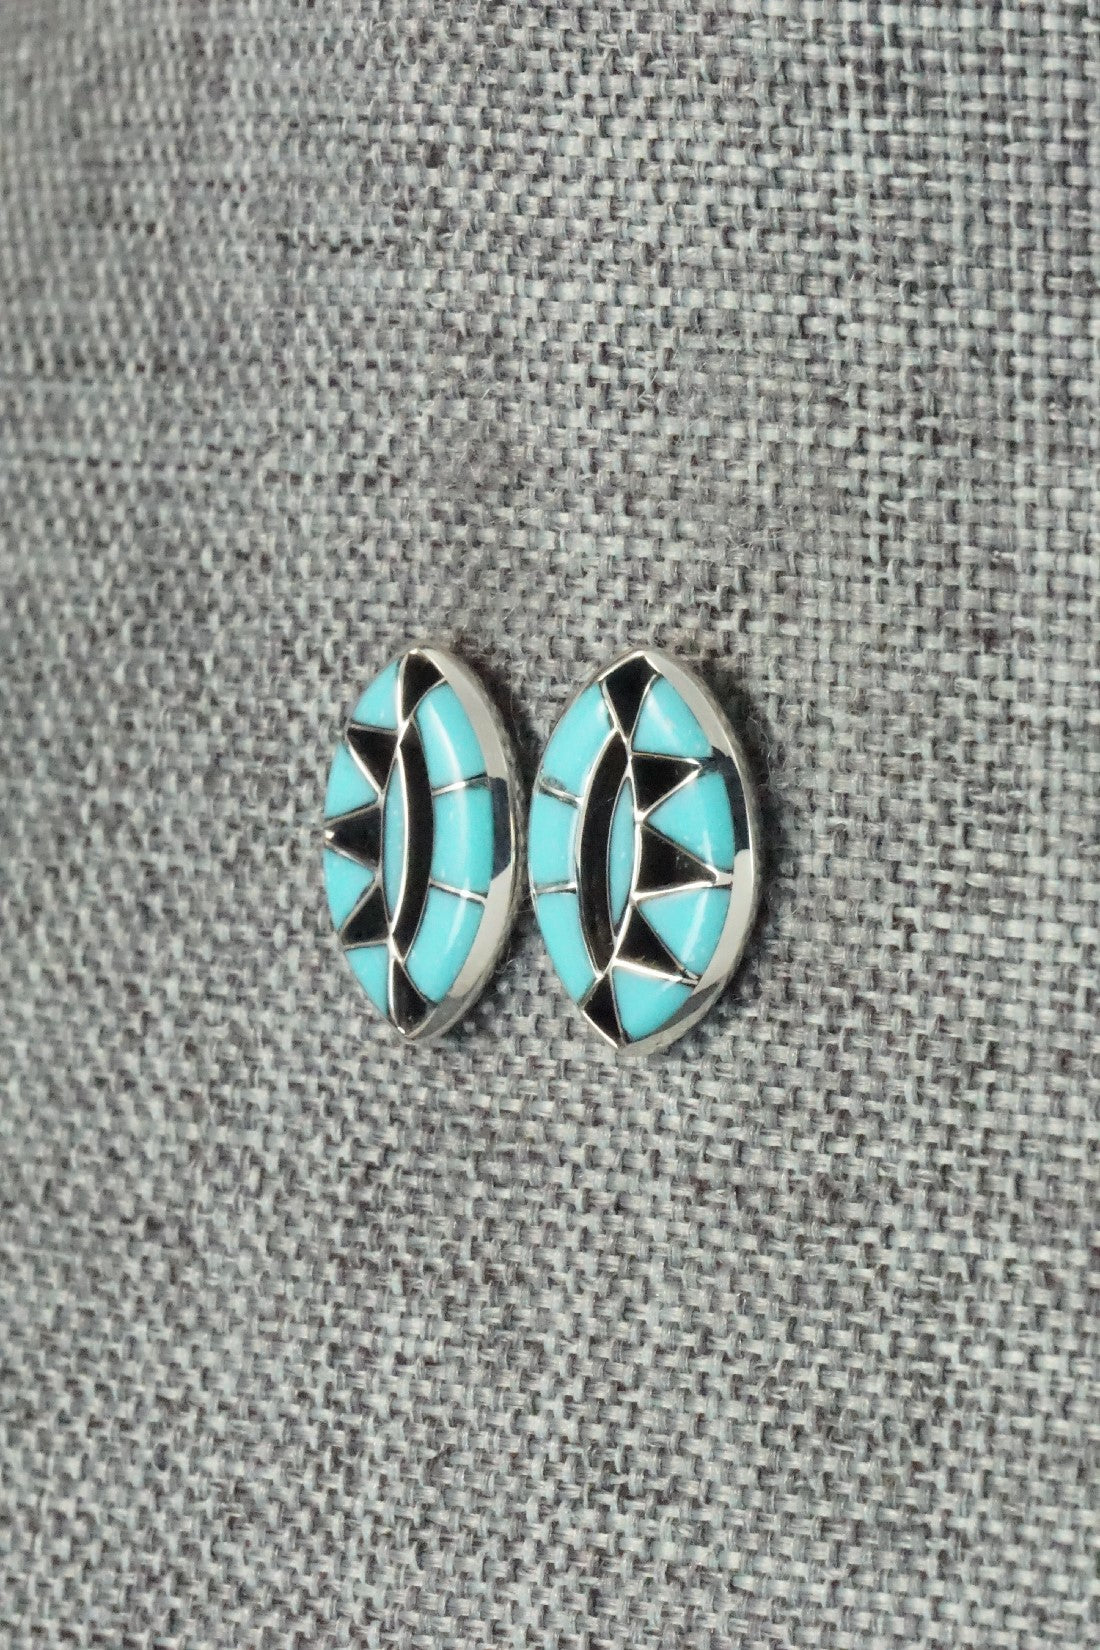 Turquoise and Sterling Silver Earrings - Vernon Quandelacy